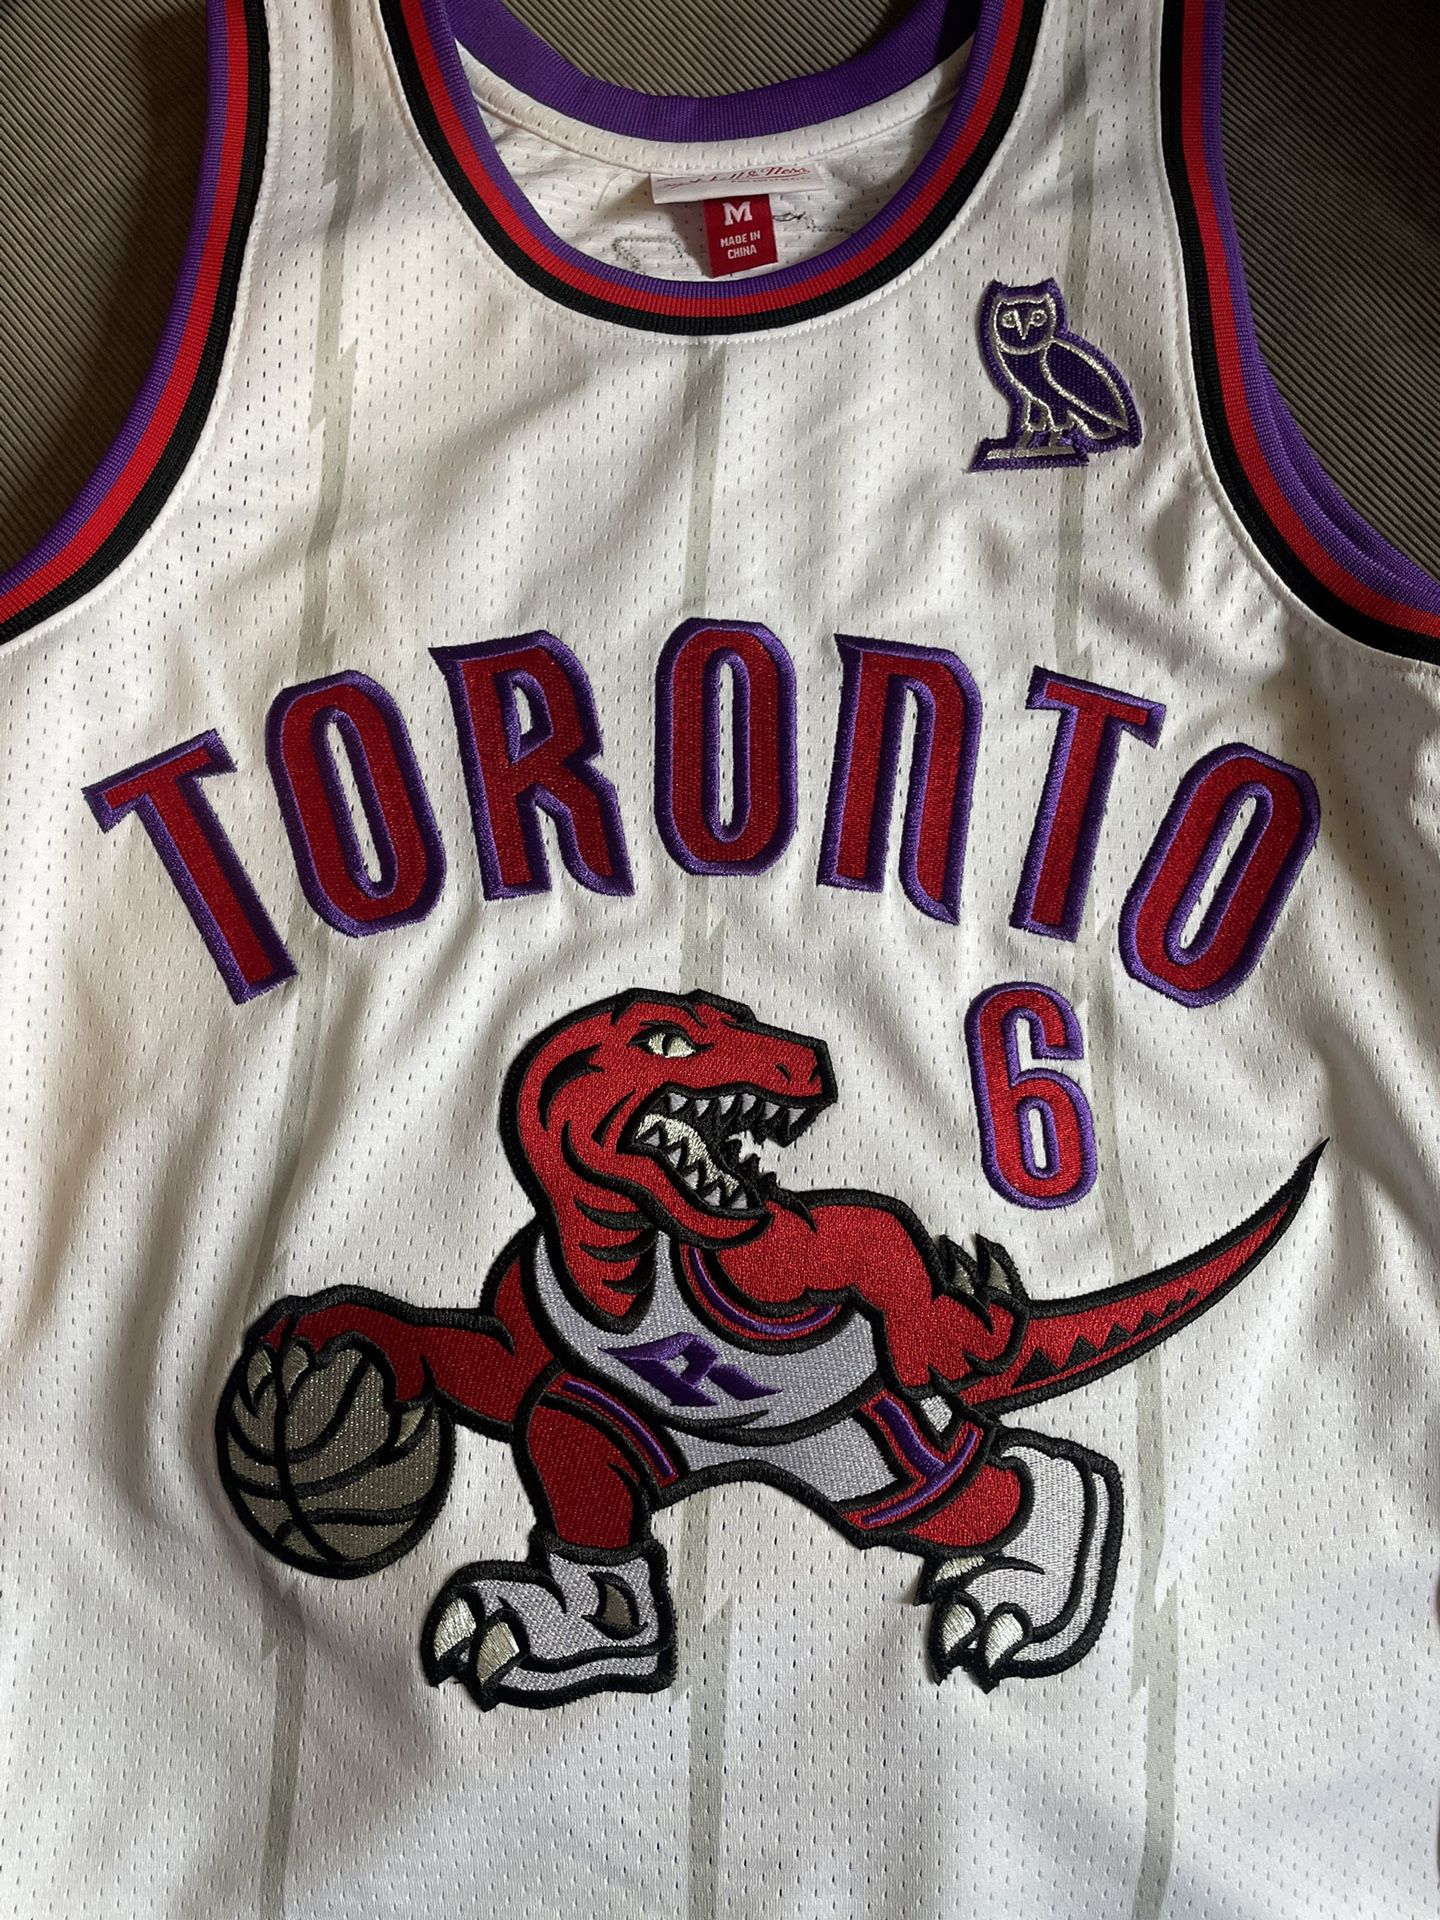 Mitchell & Ness Authentic Vince Carter Jersey for Sale in Wareham, MA -  OfferUp